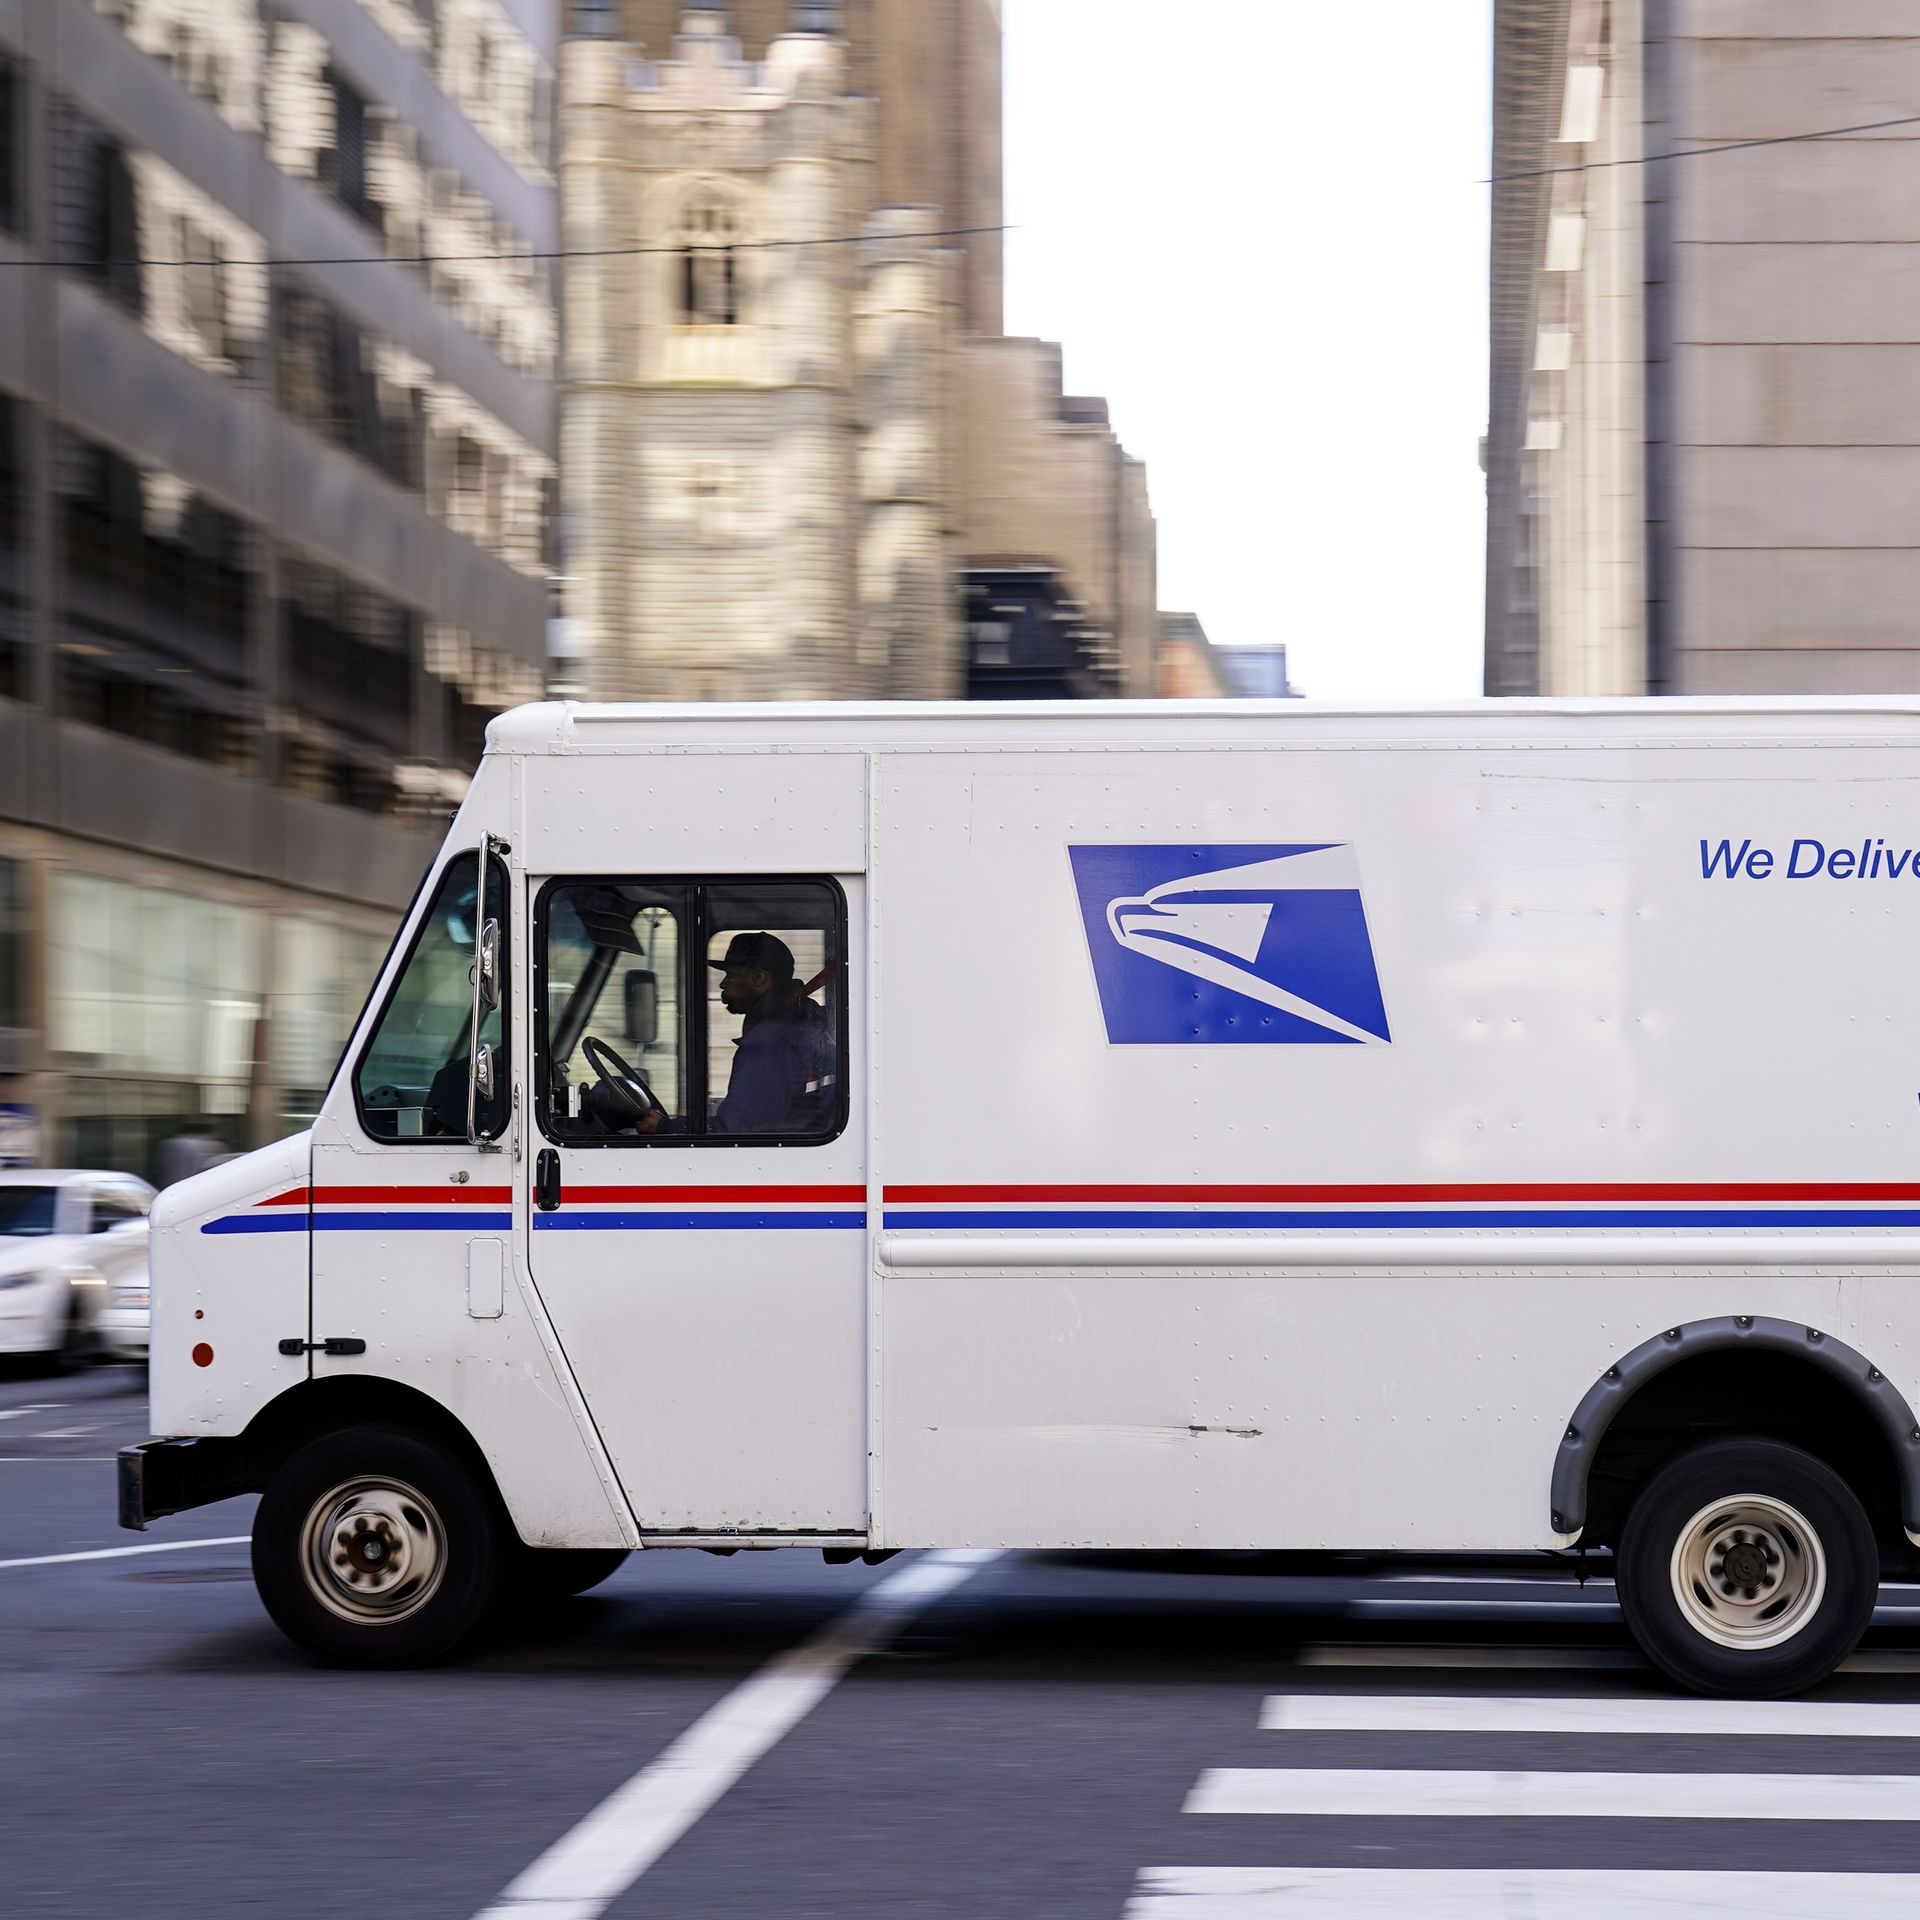 A United States Postal Service truck drives in downtown Philadelphia.